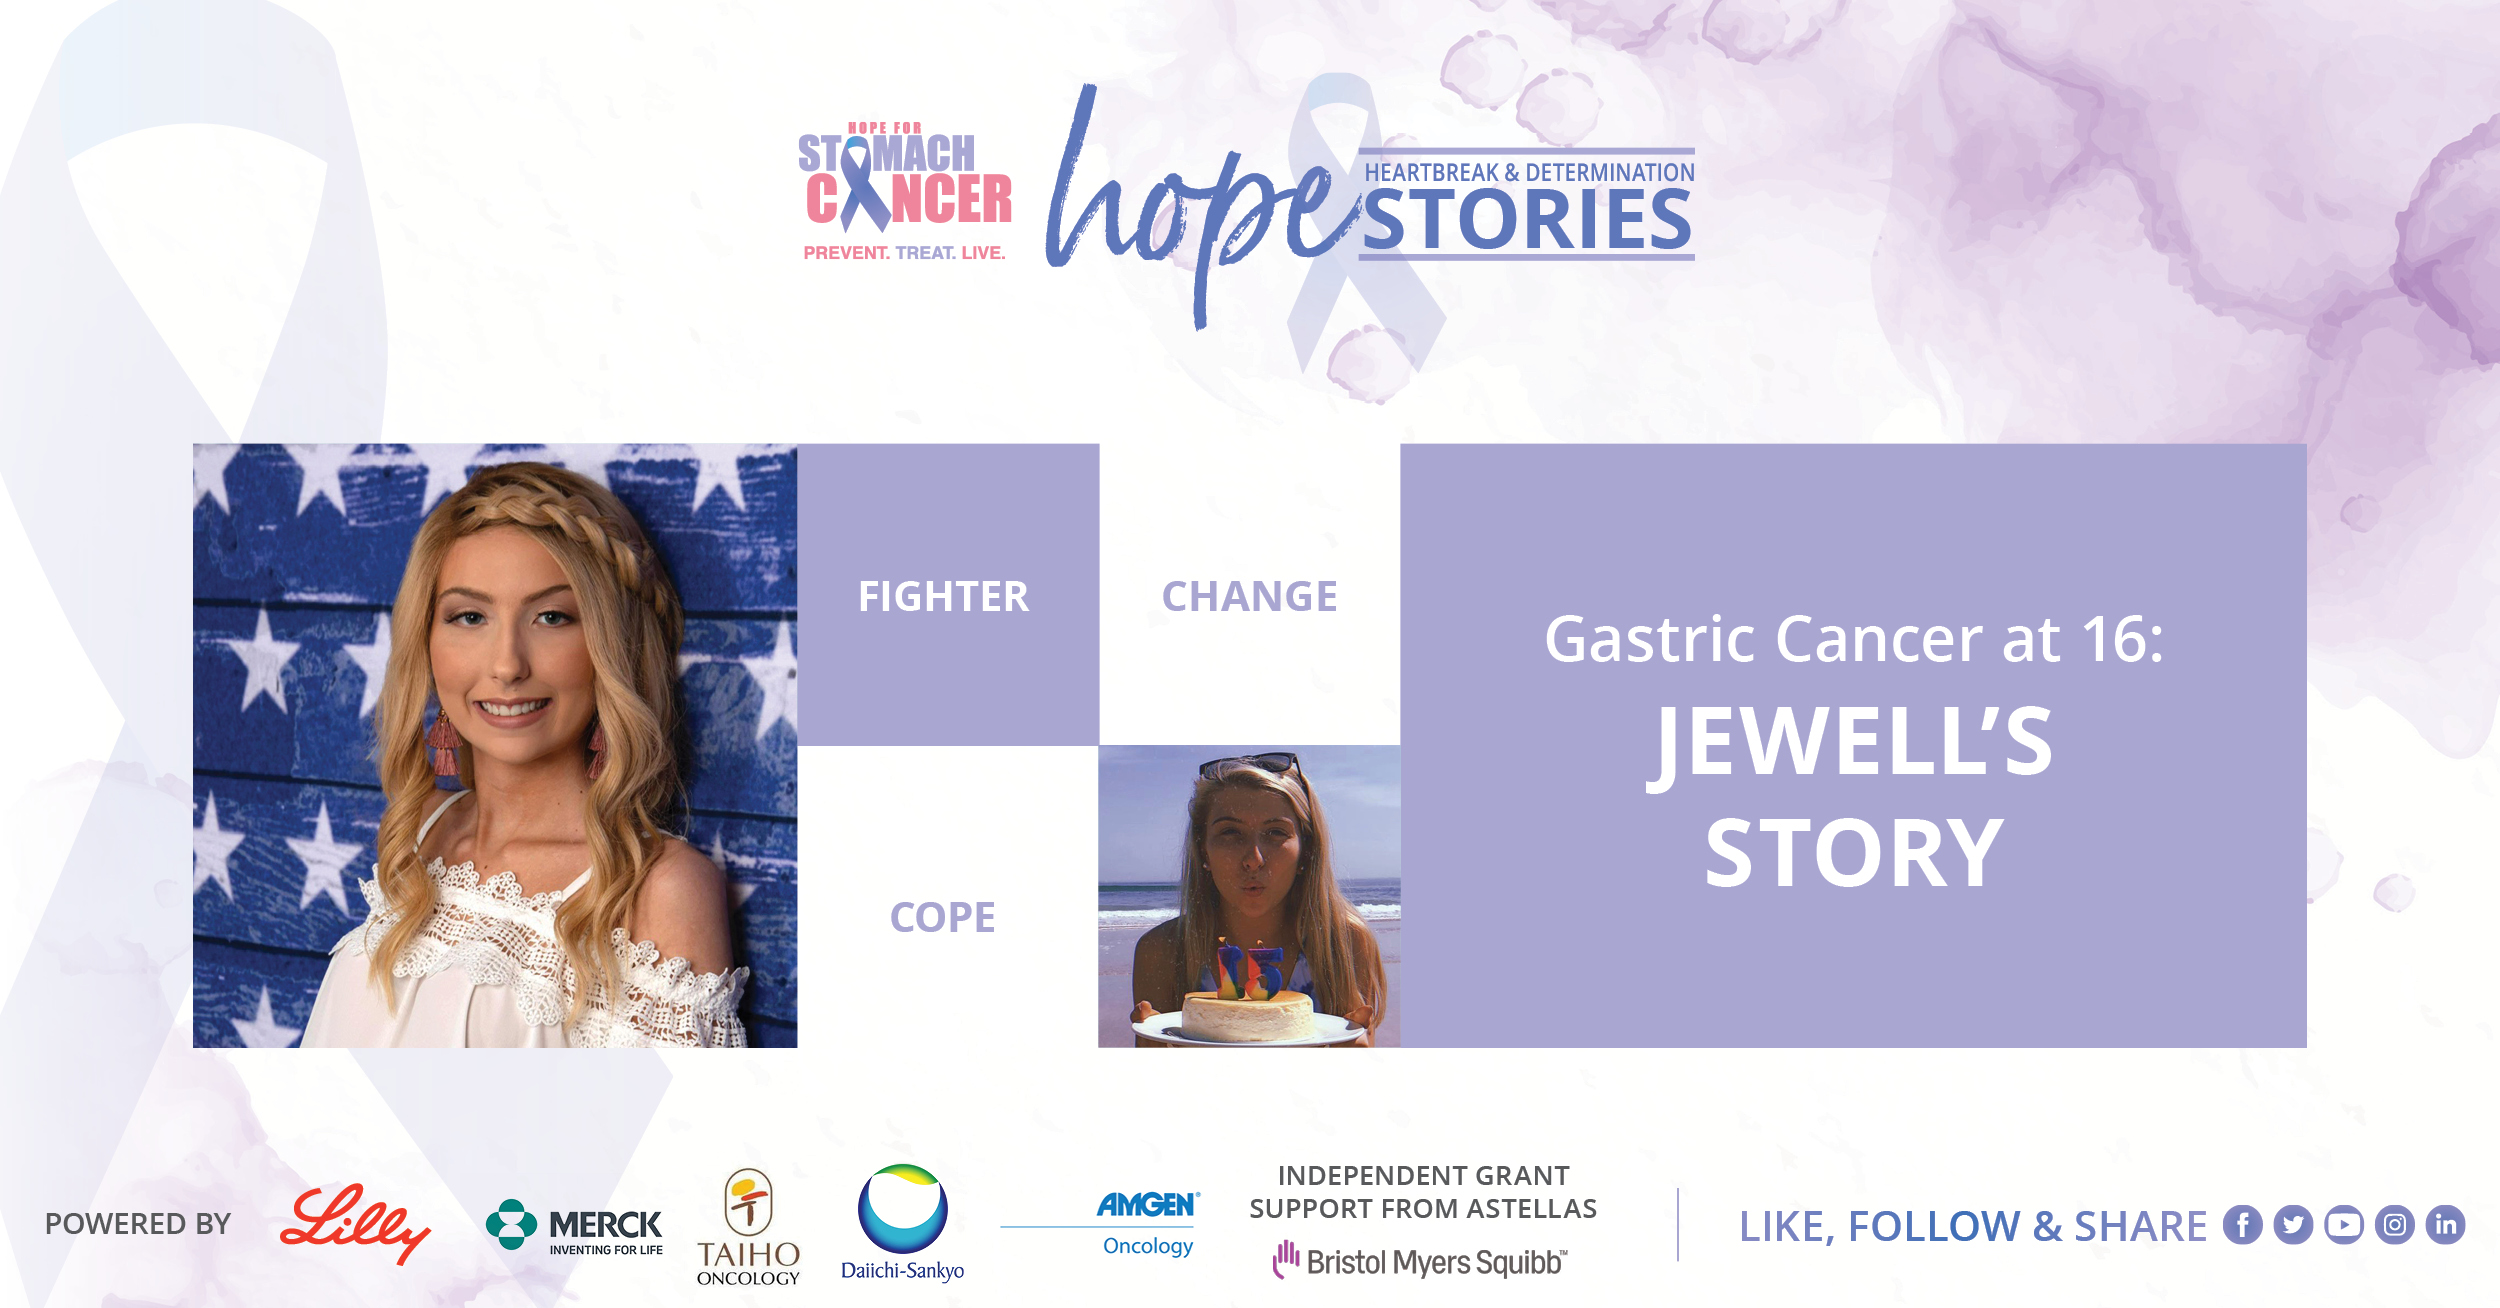 Gastric Cancer at 16 years old: Jewell's Story